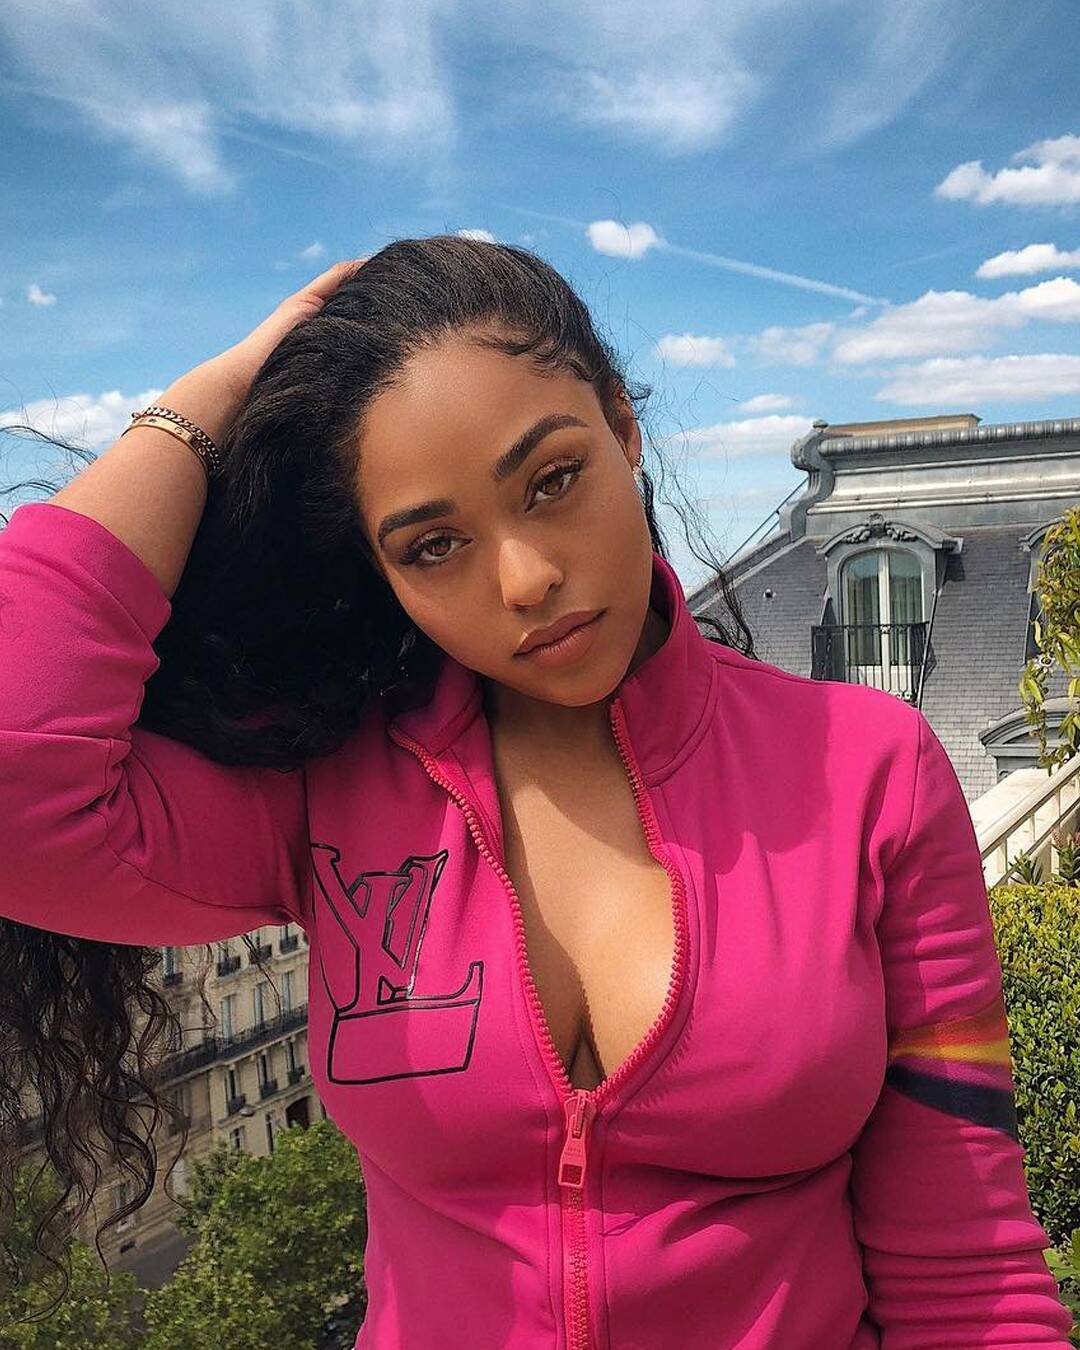 Jordyn Woods Shared New Fire Pics That Drive Fans Crazy With Excitement - Check Her Out Breaking The Internet Again!